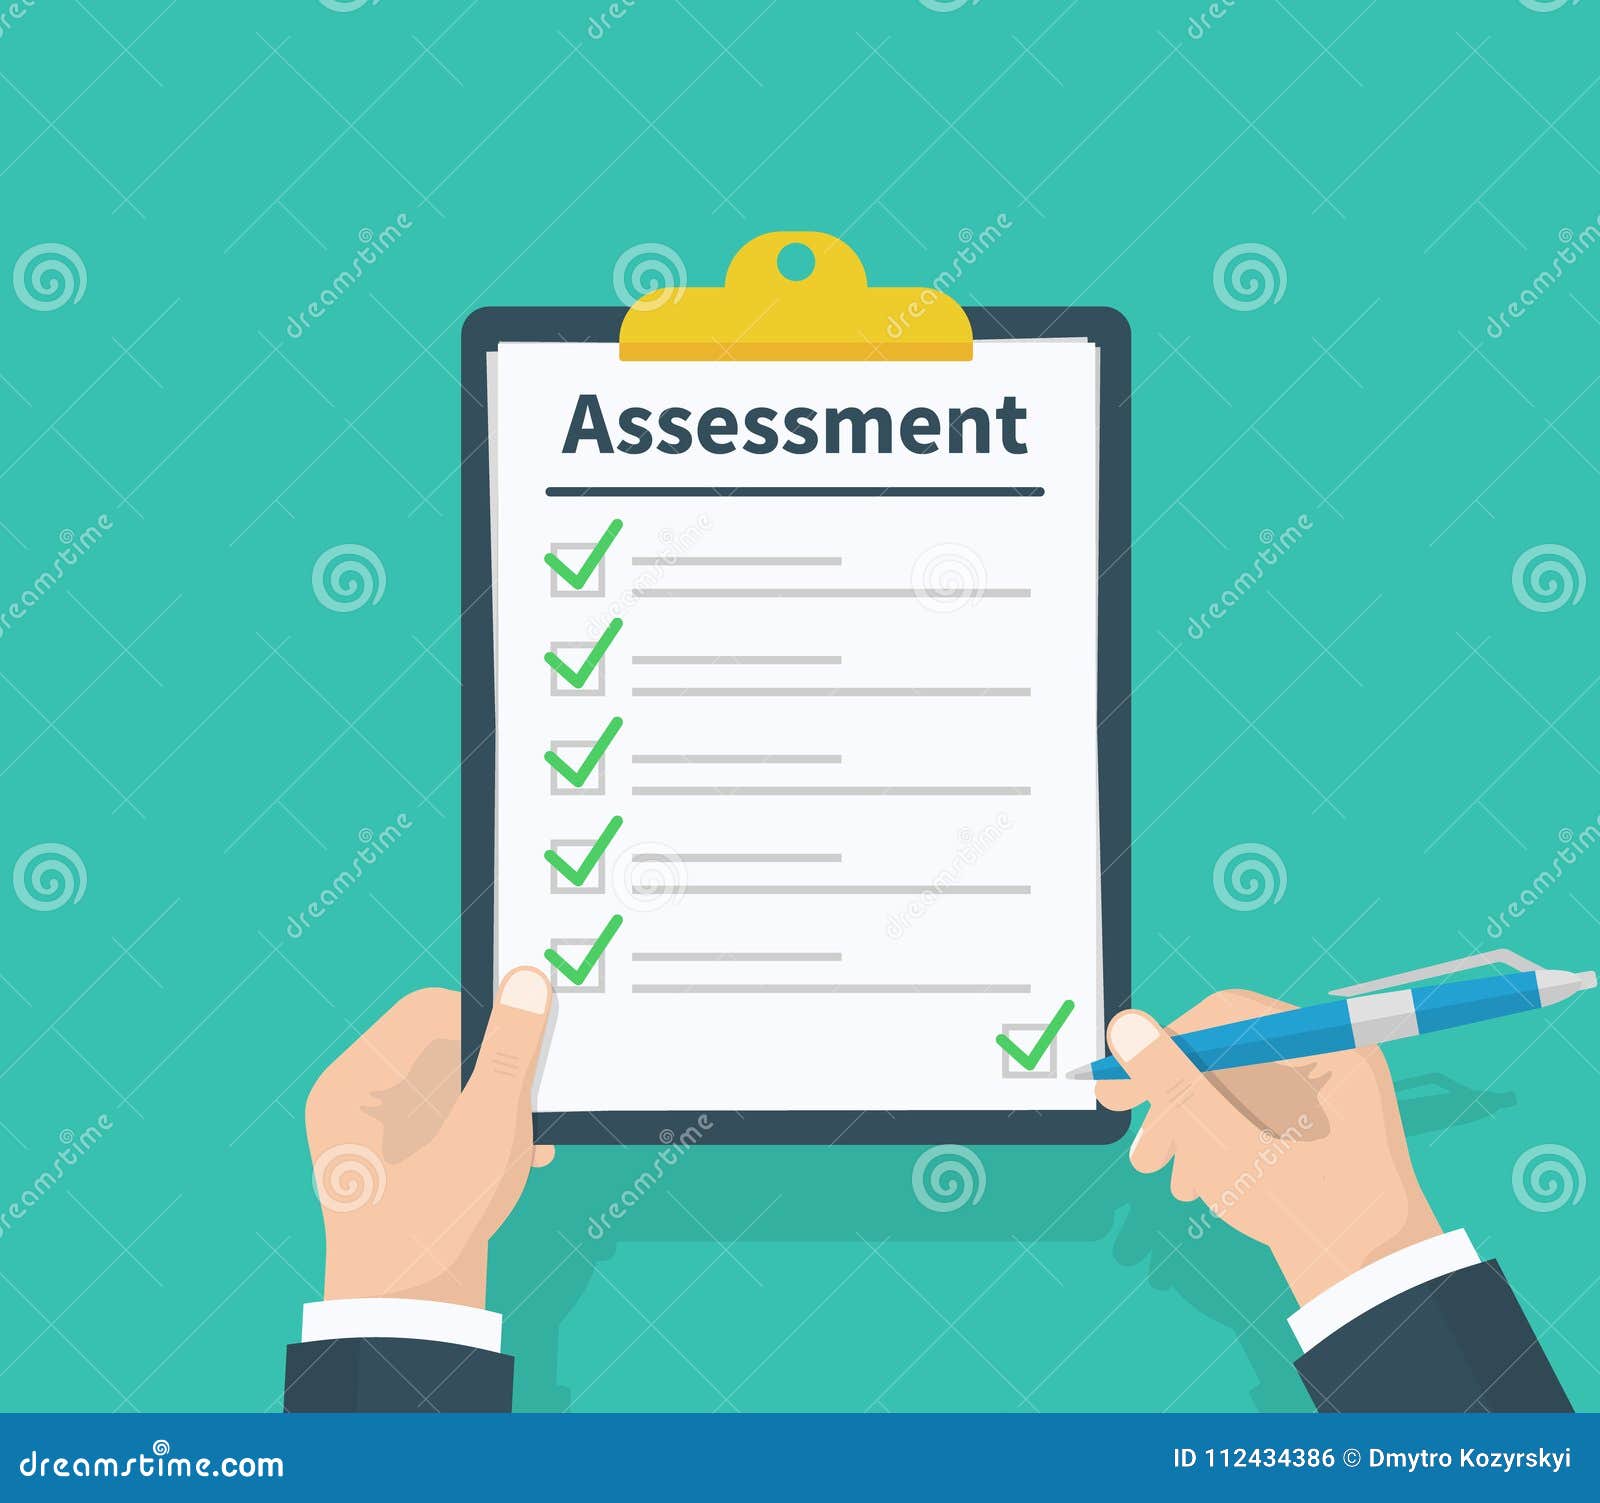 man hold clipboard with assessment, green ticks checkmarks and pen. checklist, test complete tasks, to-do list, survey